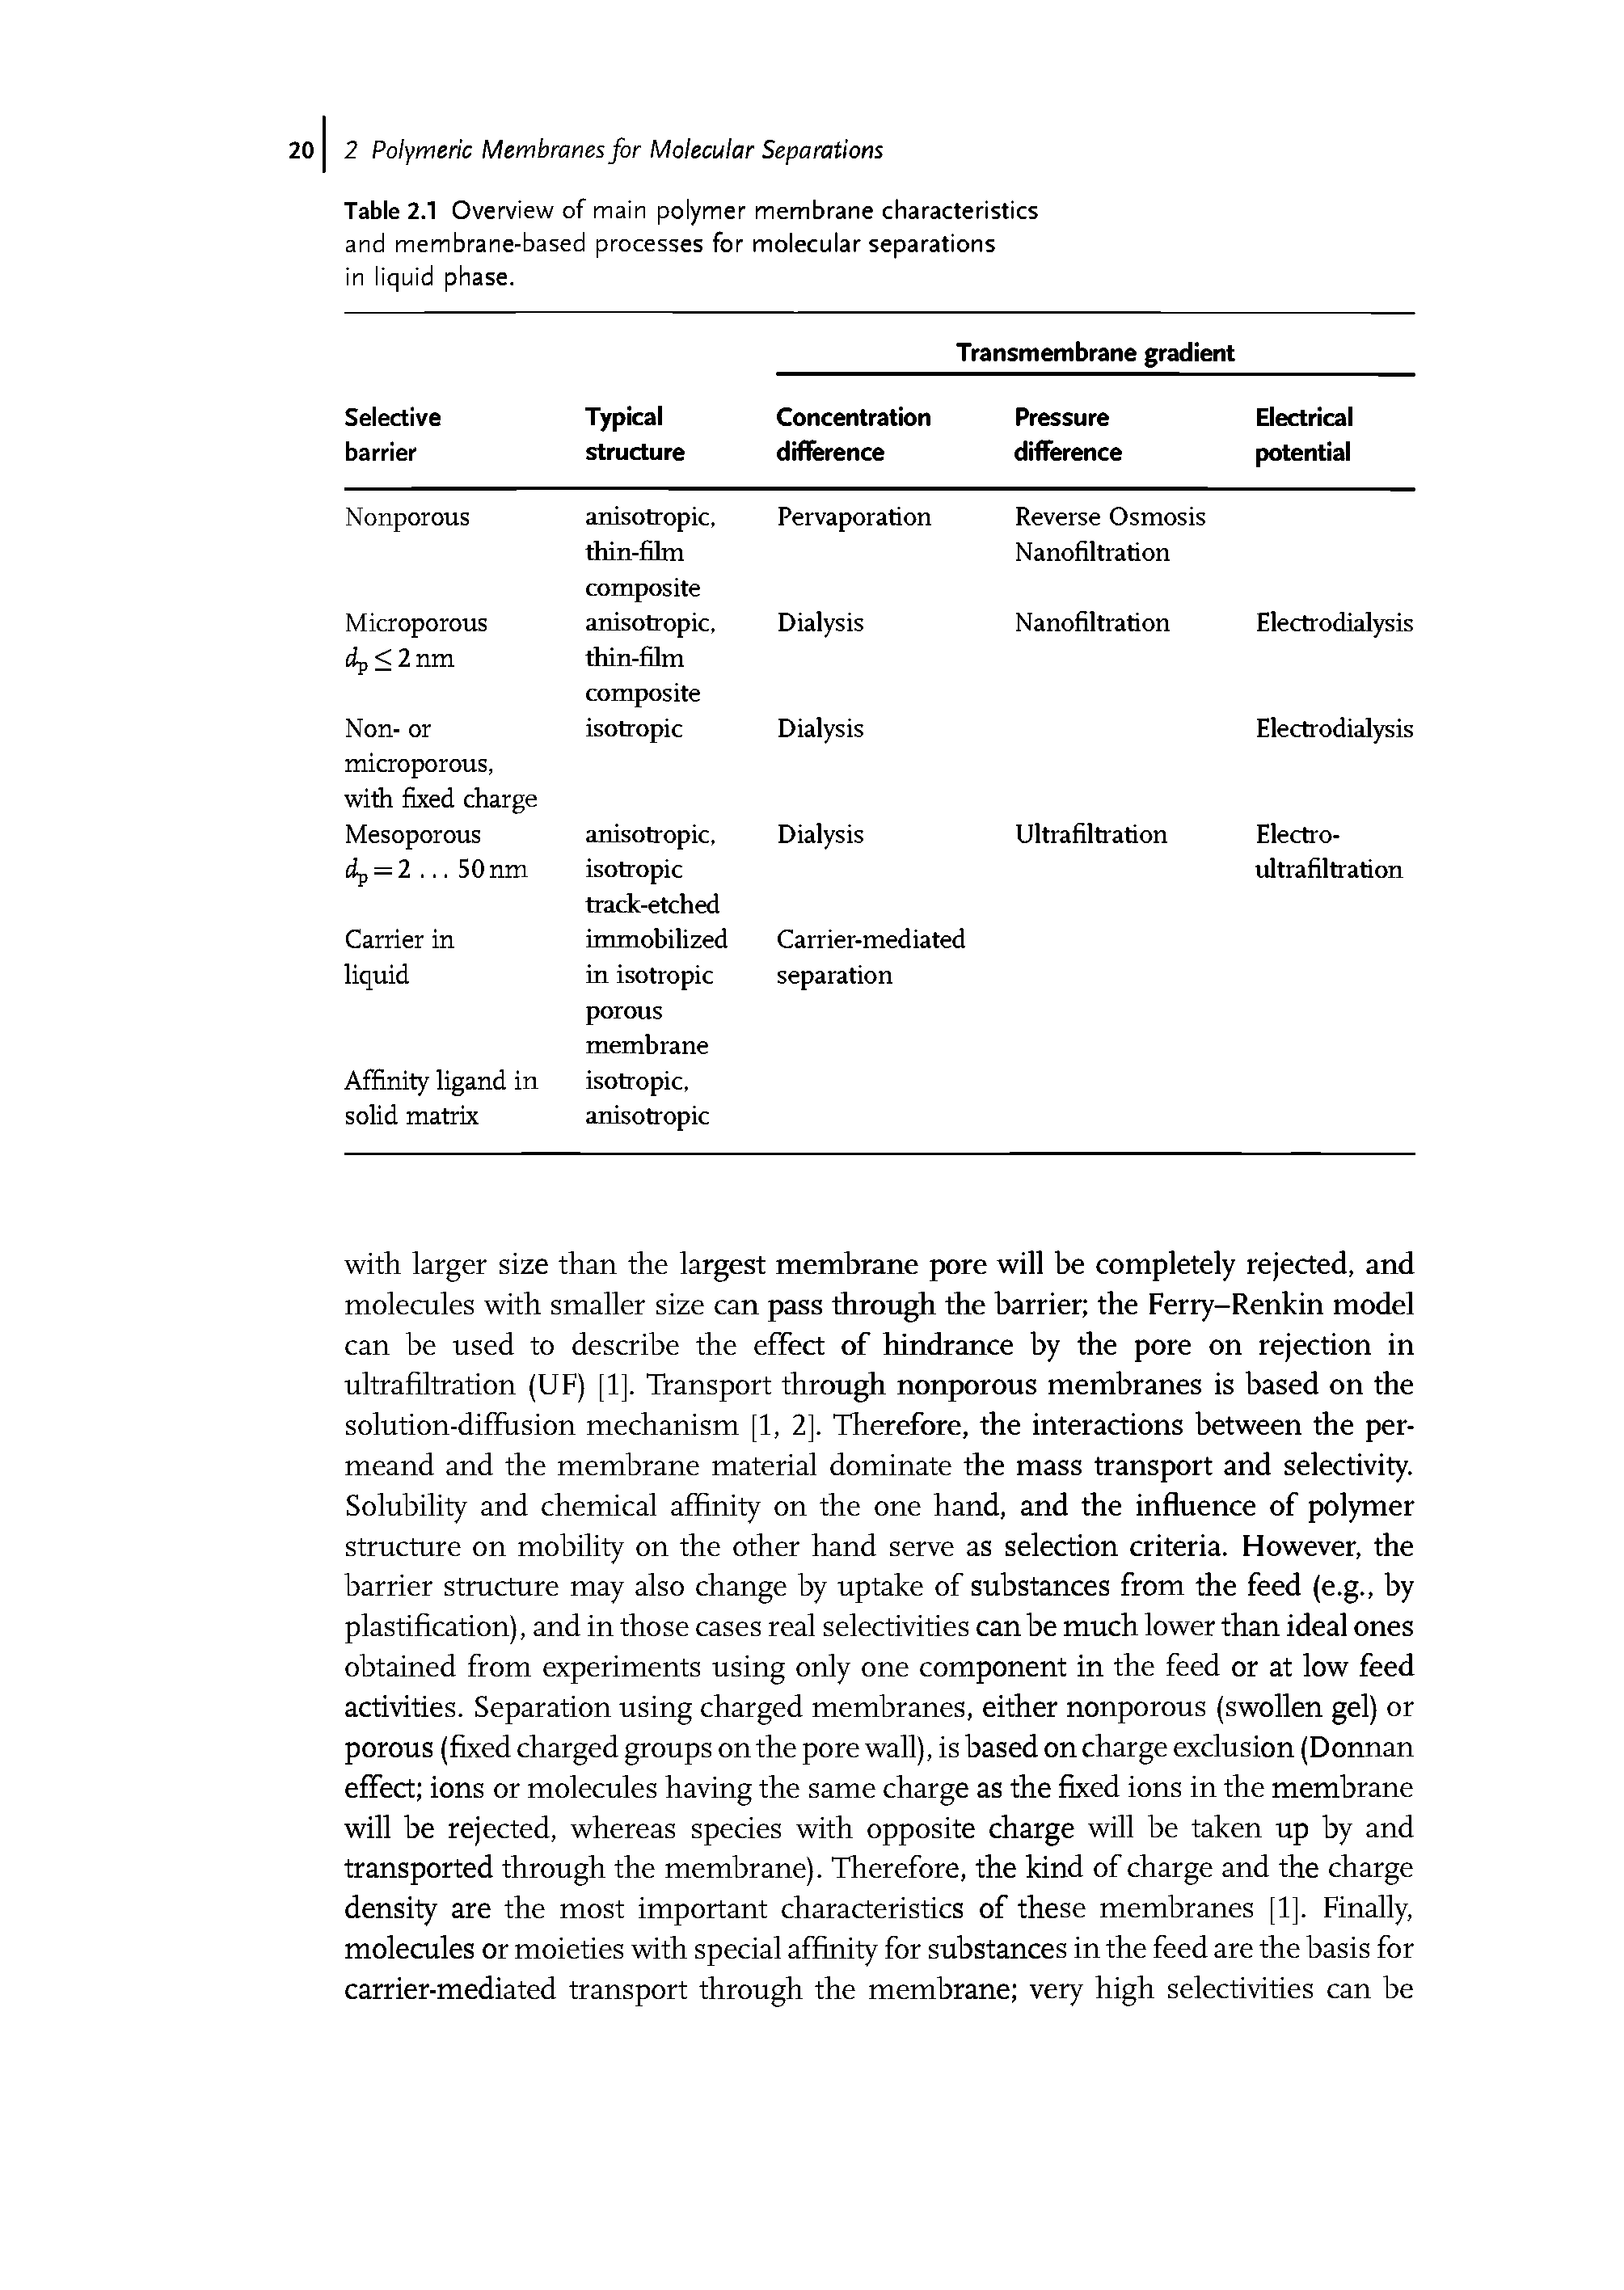 Table 2.1 Overview of main polymer membrane characteristics and membrane-based processes for molecular separations in liquid phase.